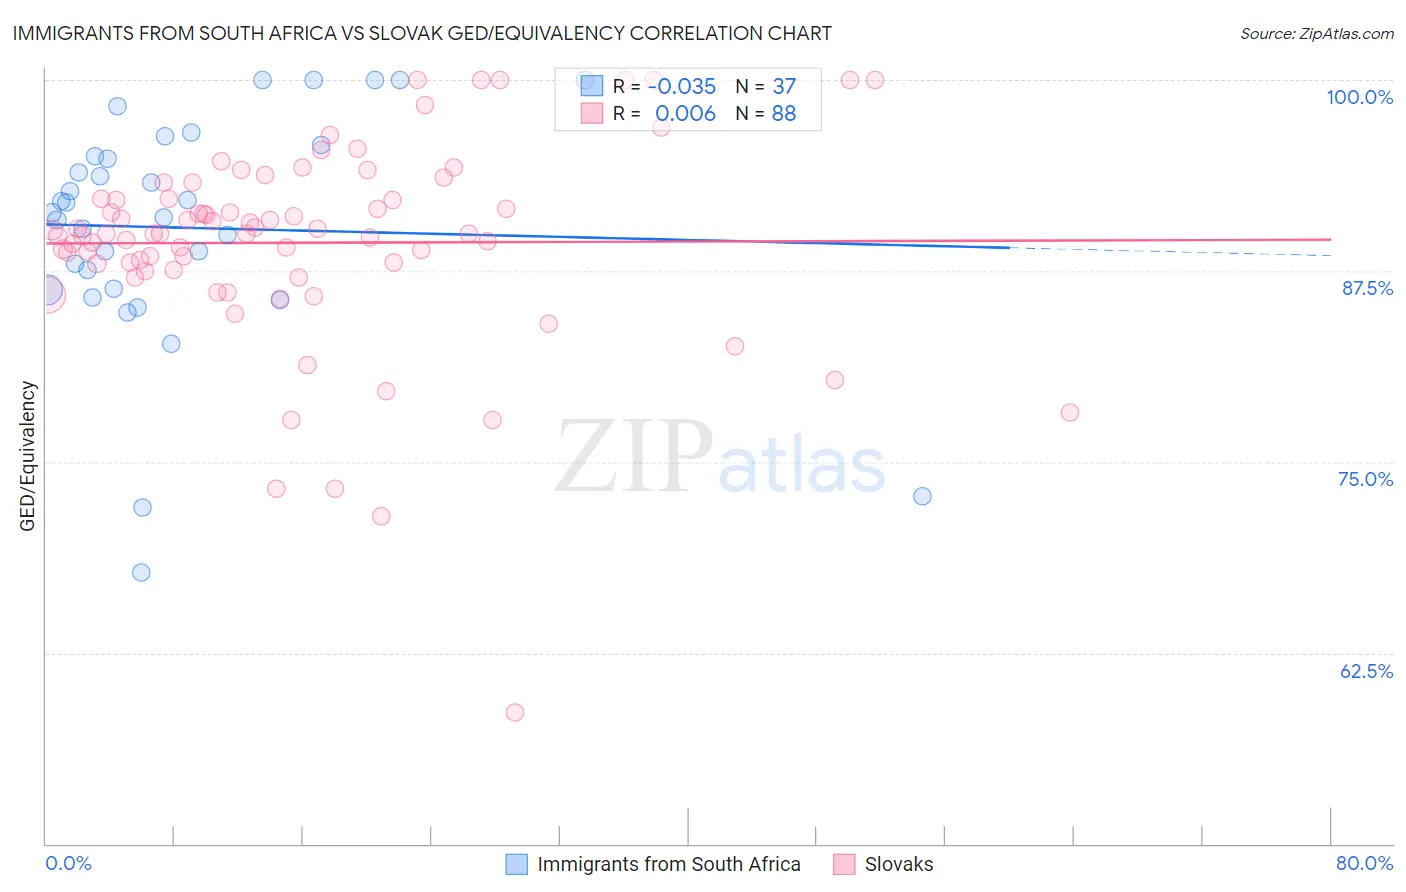 Immigrants from South Africa vs Slovak GED/Equivalency